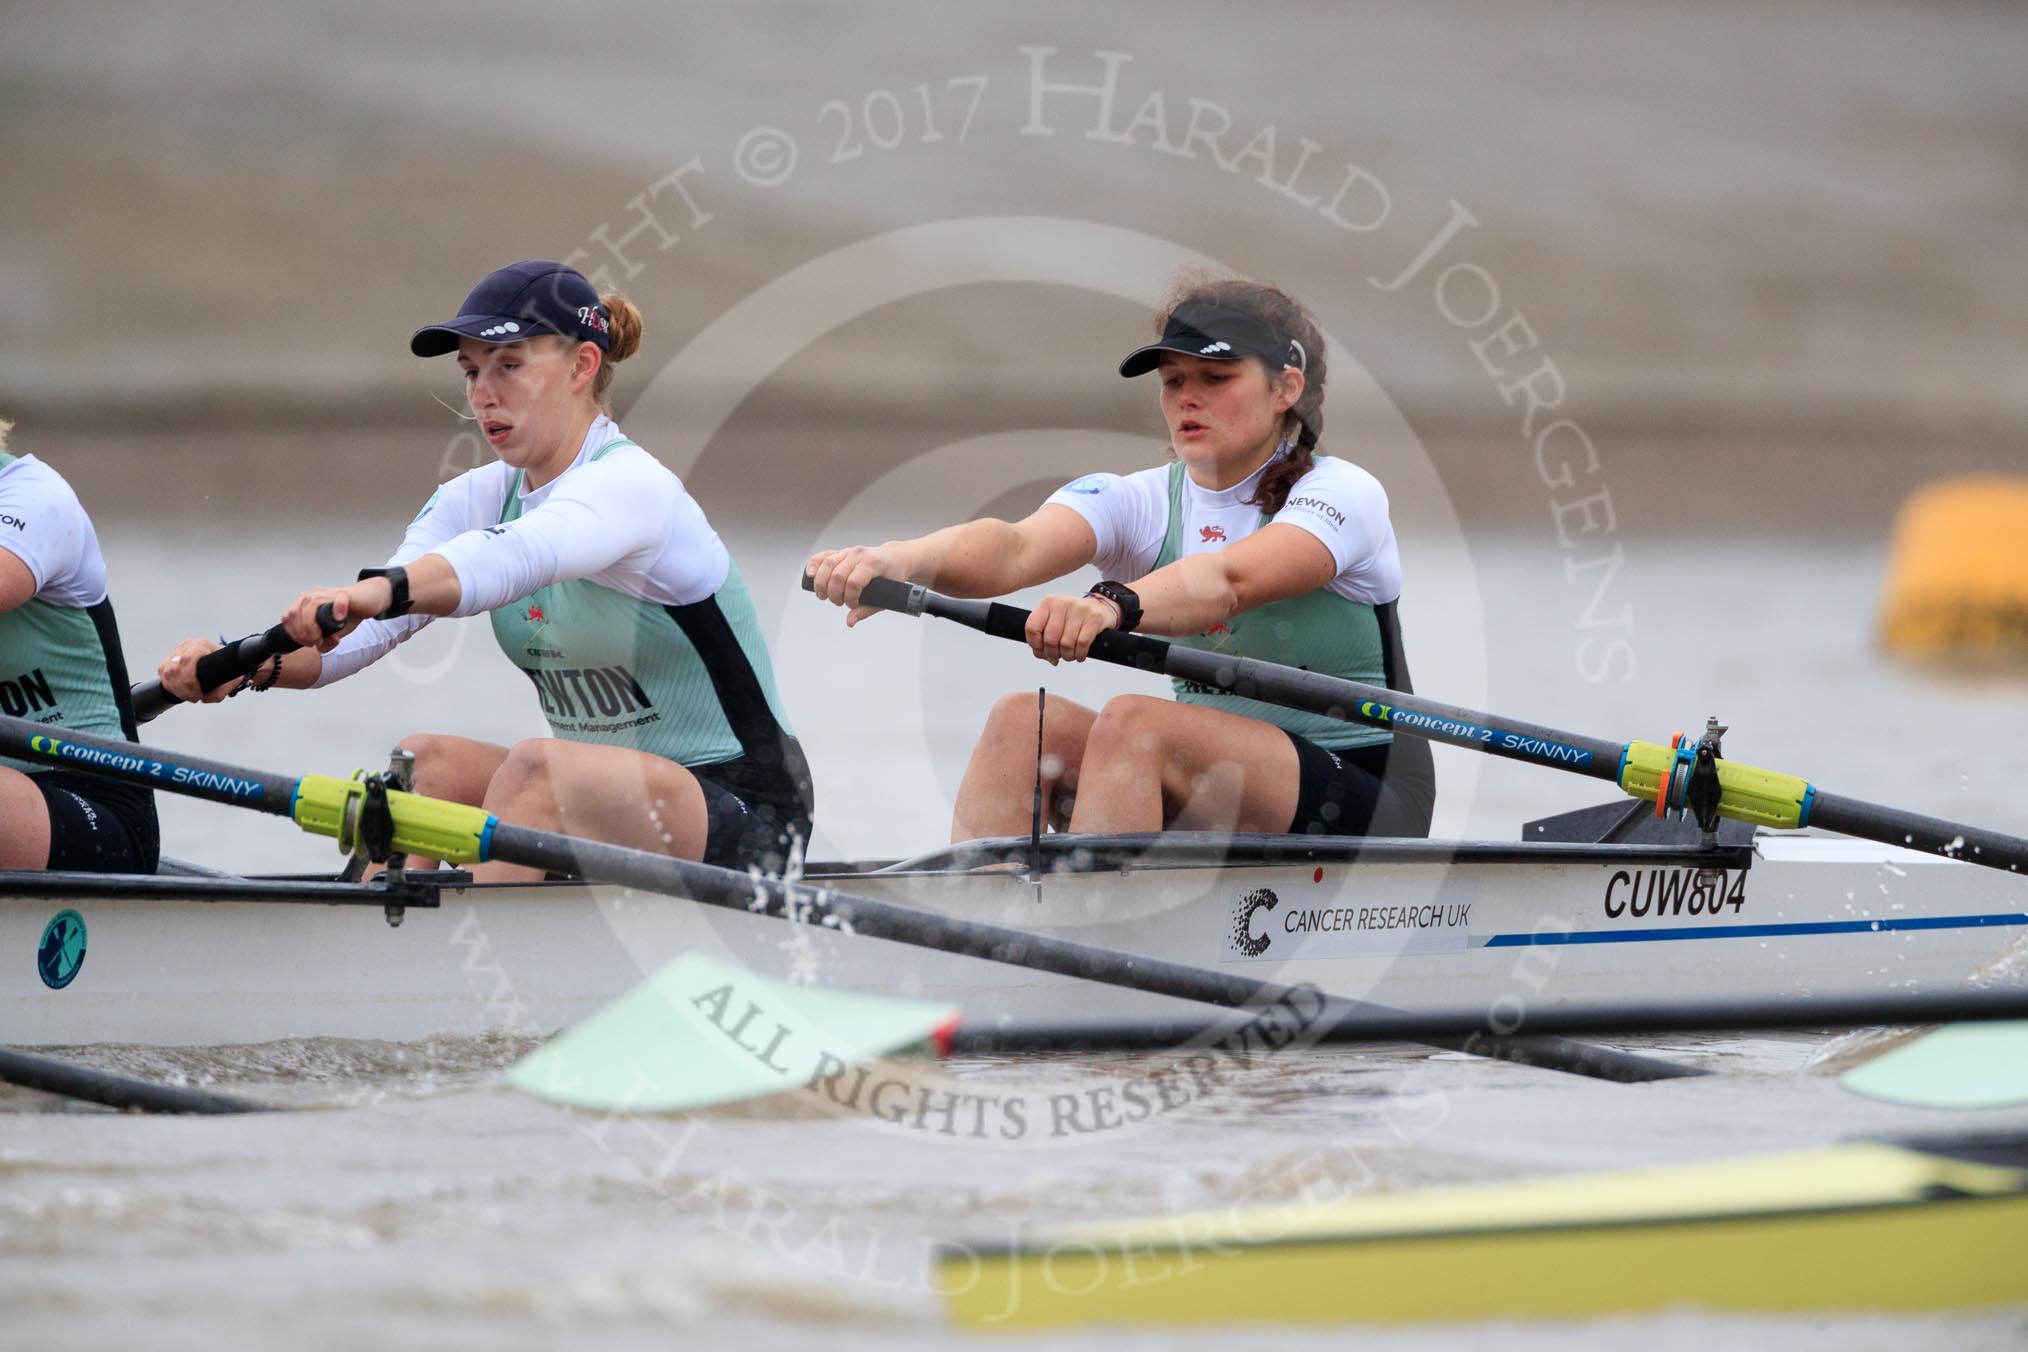 The Boat Race season 2018 - Women's Boat Race Trial Eights (CUWBC, Cambridge): Expecto Patronum near the Putney boathouses, here 3 Sally O Brien, 2 Millie Perrin, bow Eve Caroe.
River Thames between Putney Bridge and Mortlake,
London SW15,

United Kingdom,
on 05 December 2017 at 12:44, image #60